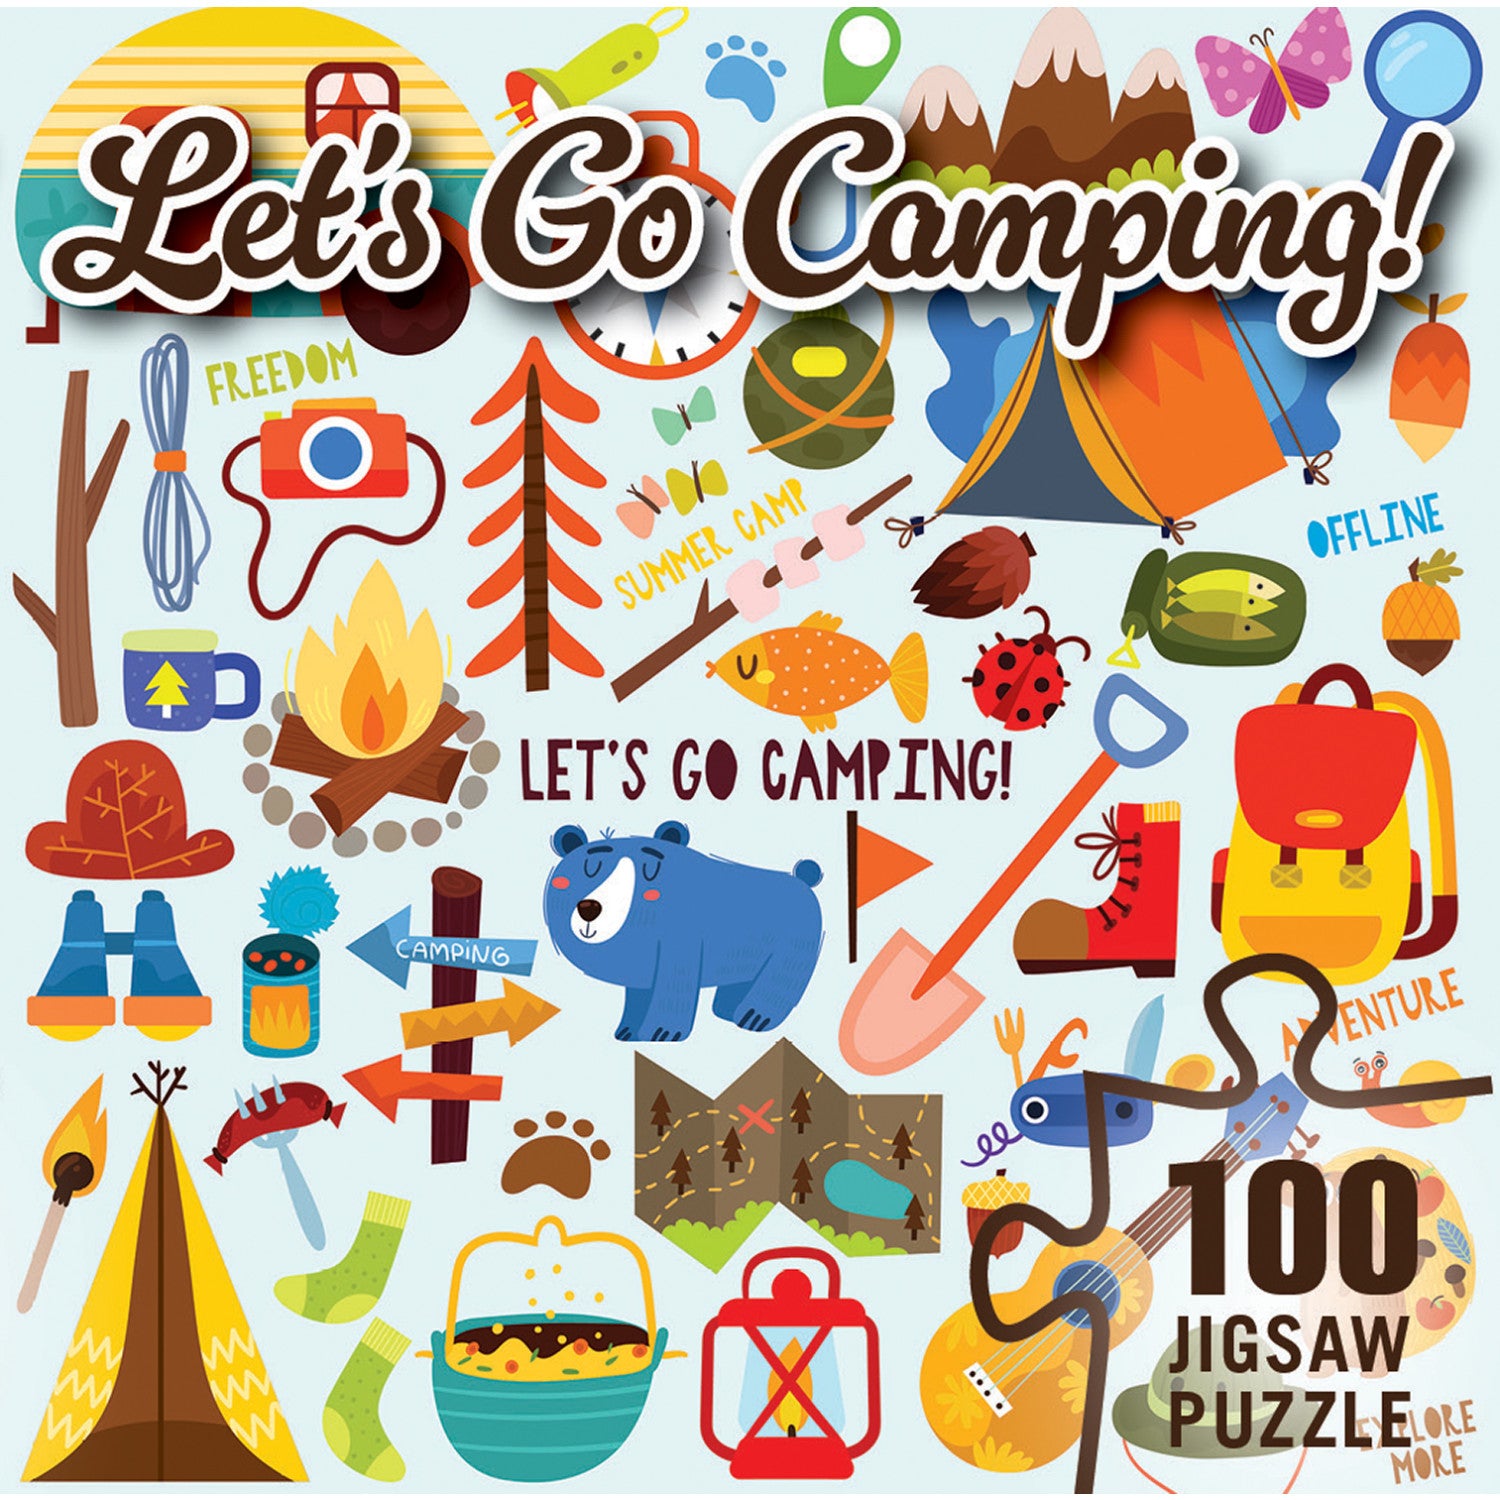 Let's Go Camping 100 Piece Jigsaw Puzzle